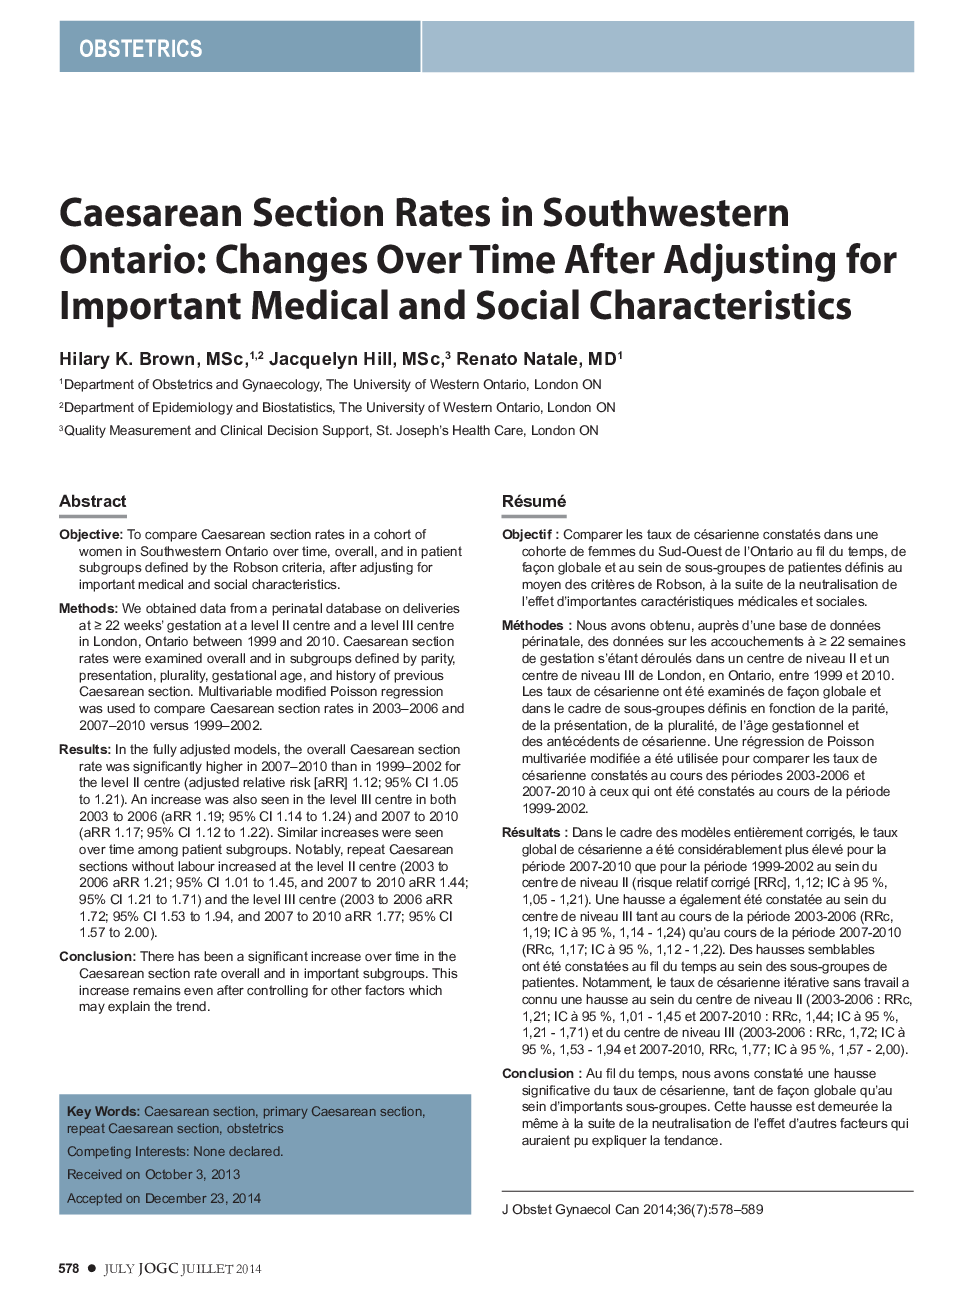 Caesarean Section Rates in Southwestern Ontario: Changes Over Time After Adjusting for Important Medical and Social Characteristics